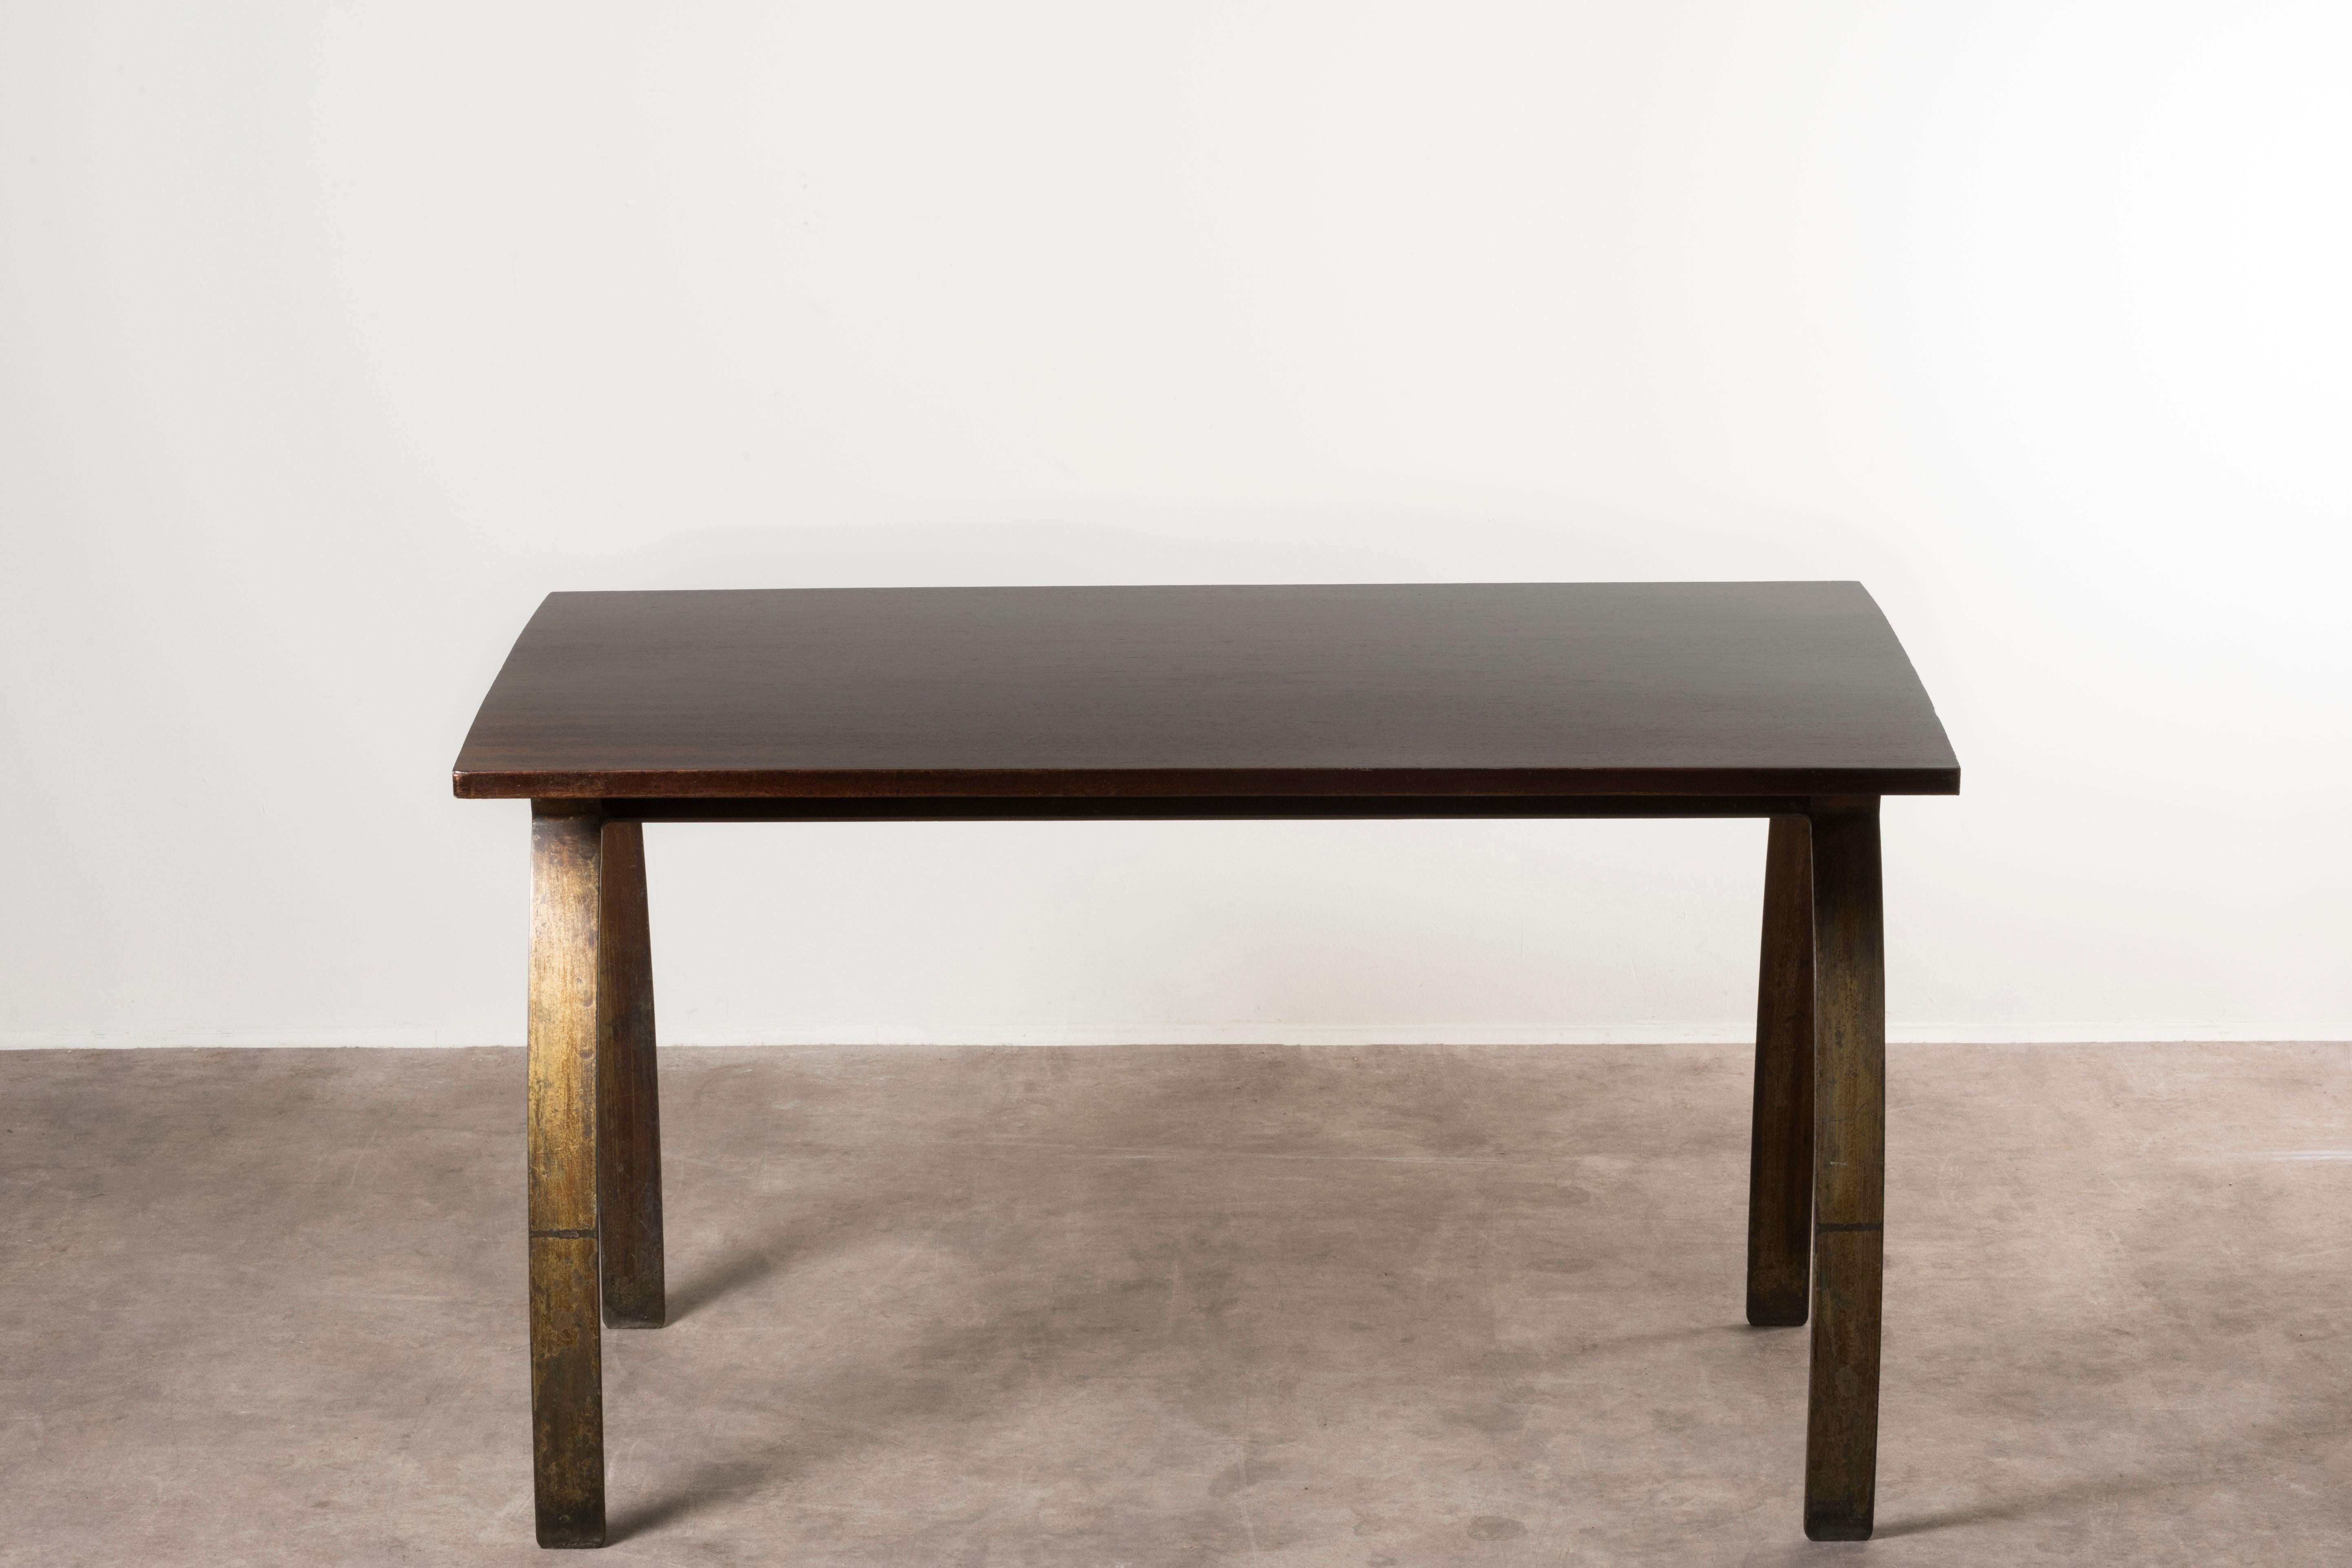 Dining table André Renou and Jean-Pierre Genisset
France, ca. 1950
Realized for Hotel 